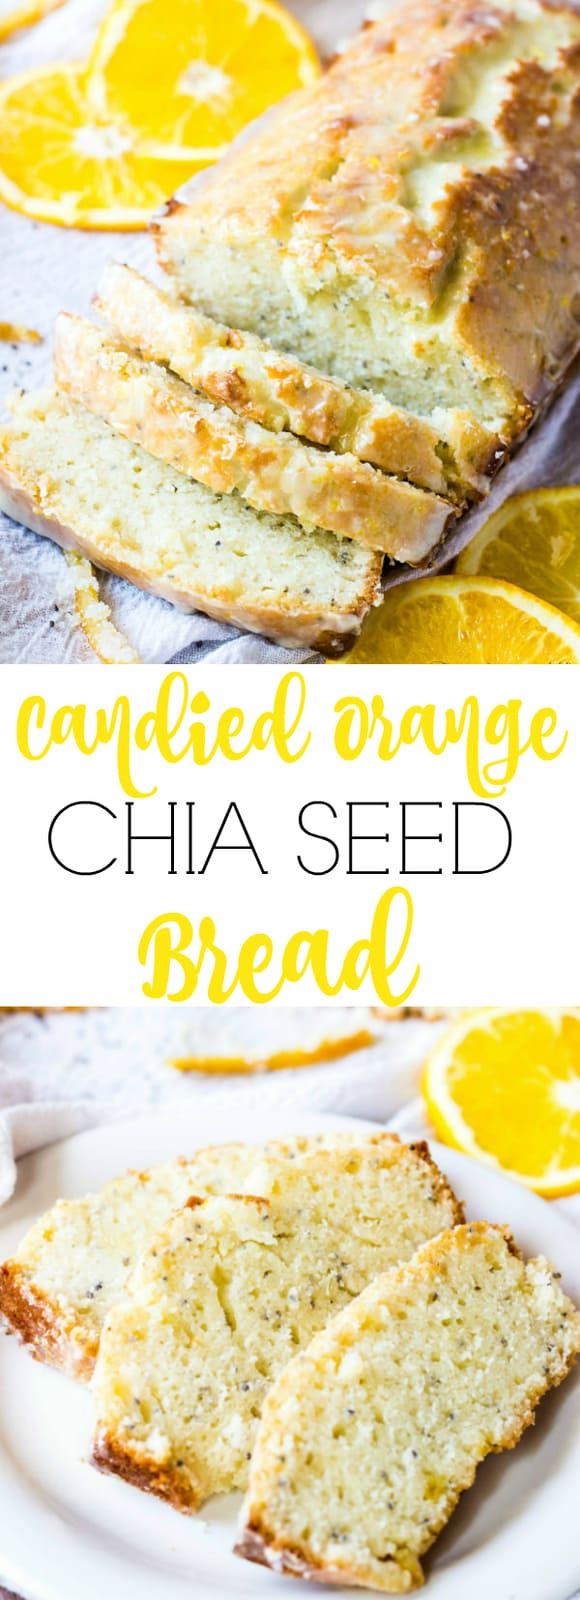 Candied Orange Chia Seed Bread pinterest collage with words in middle